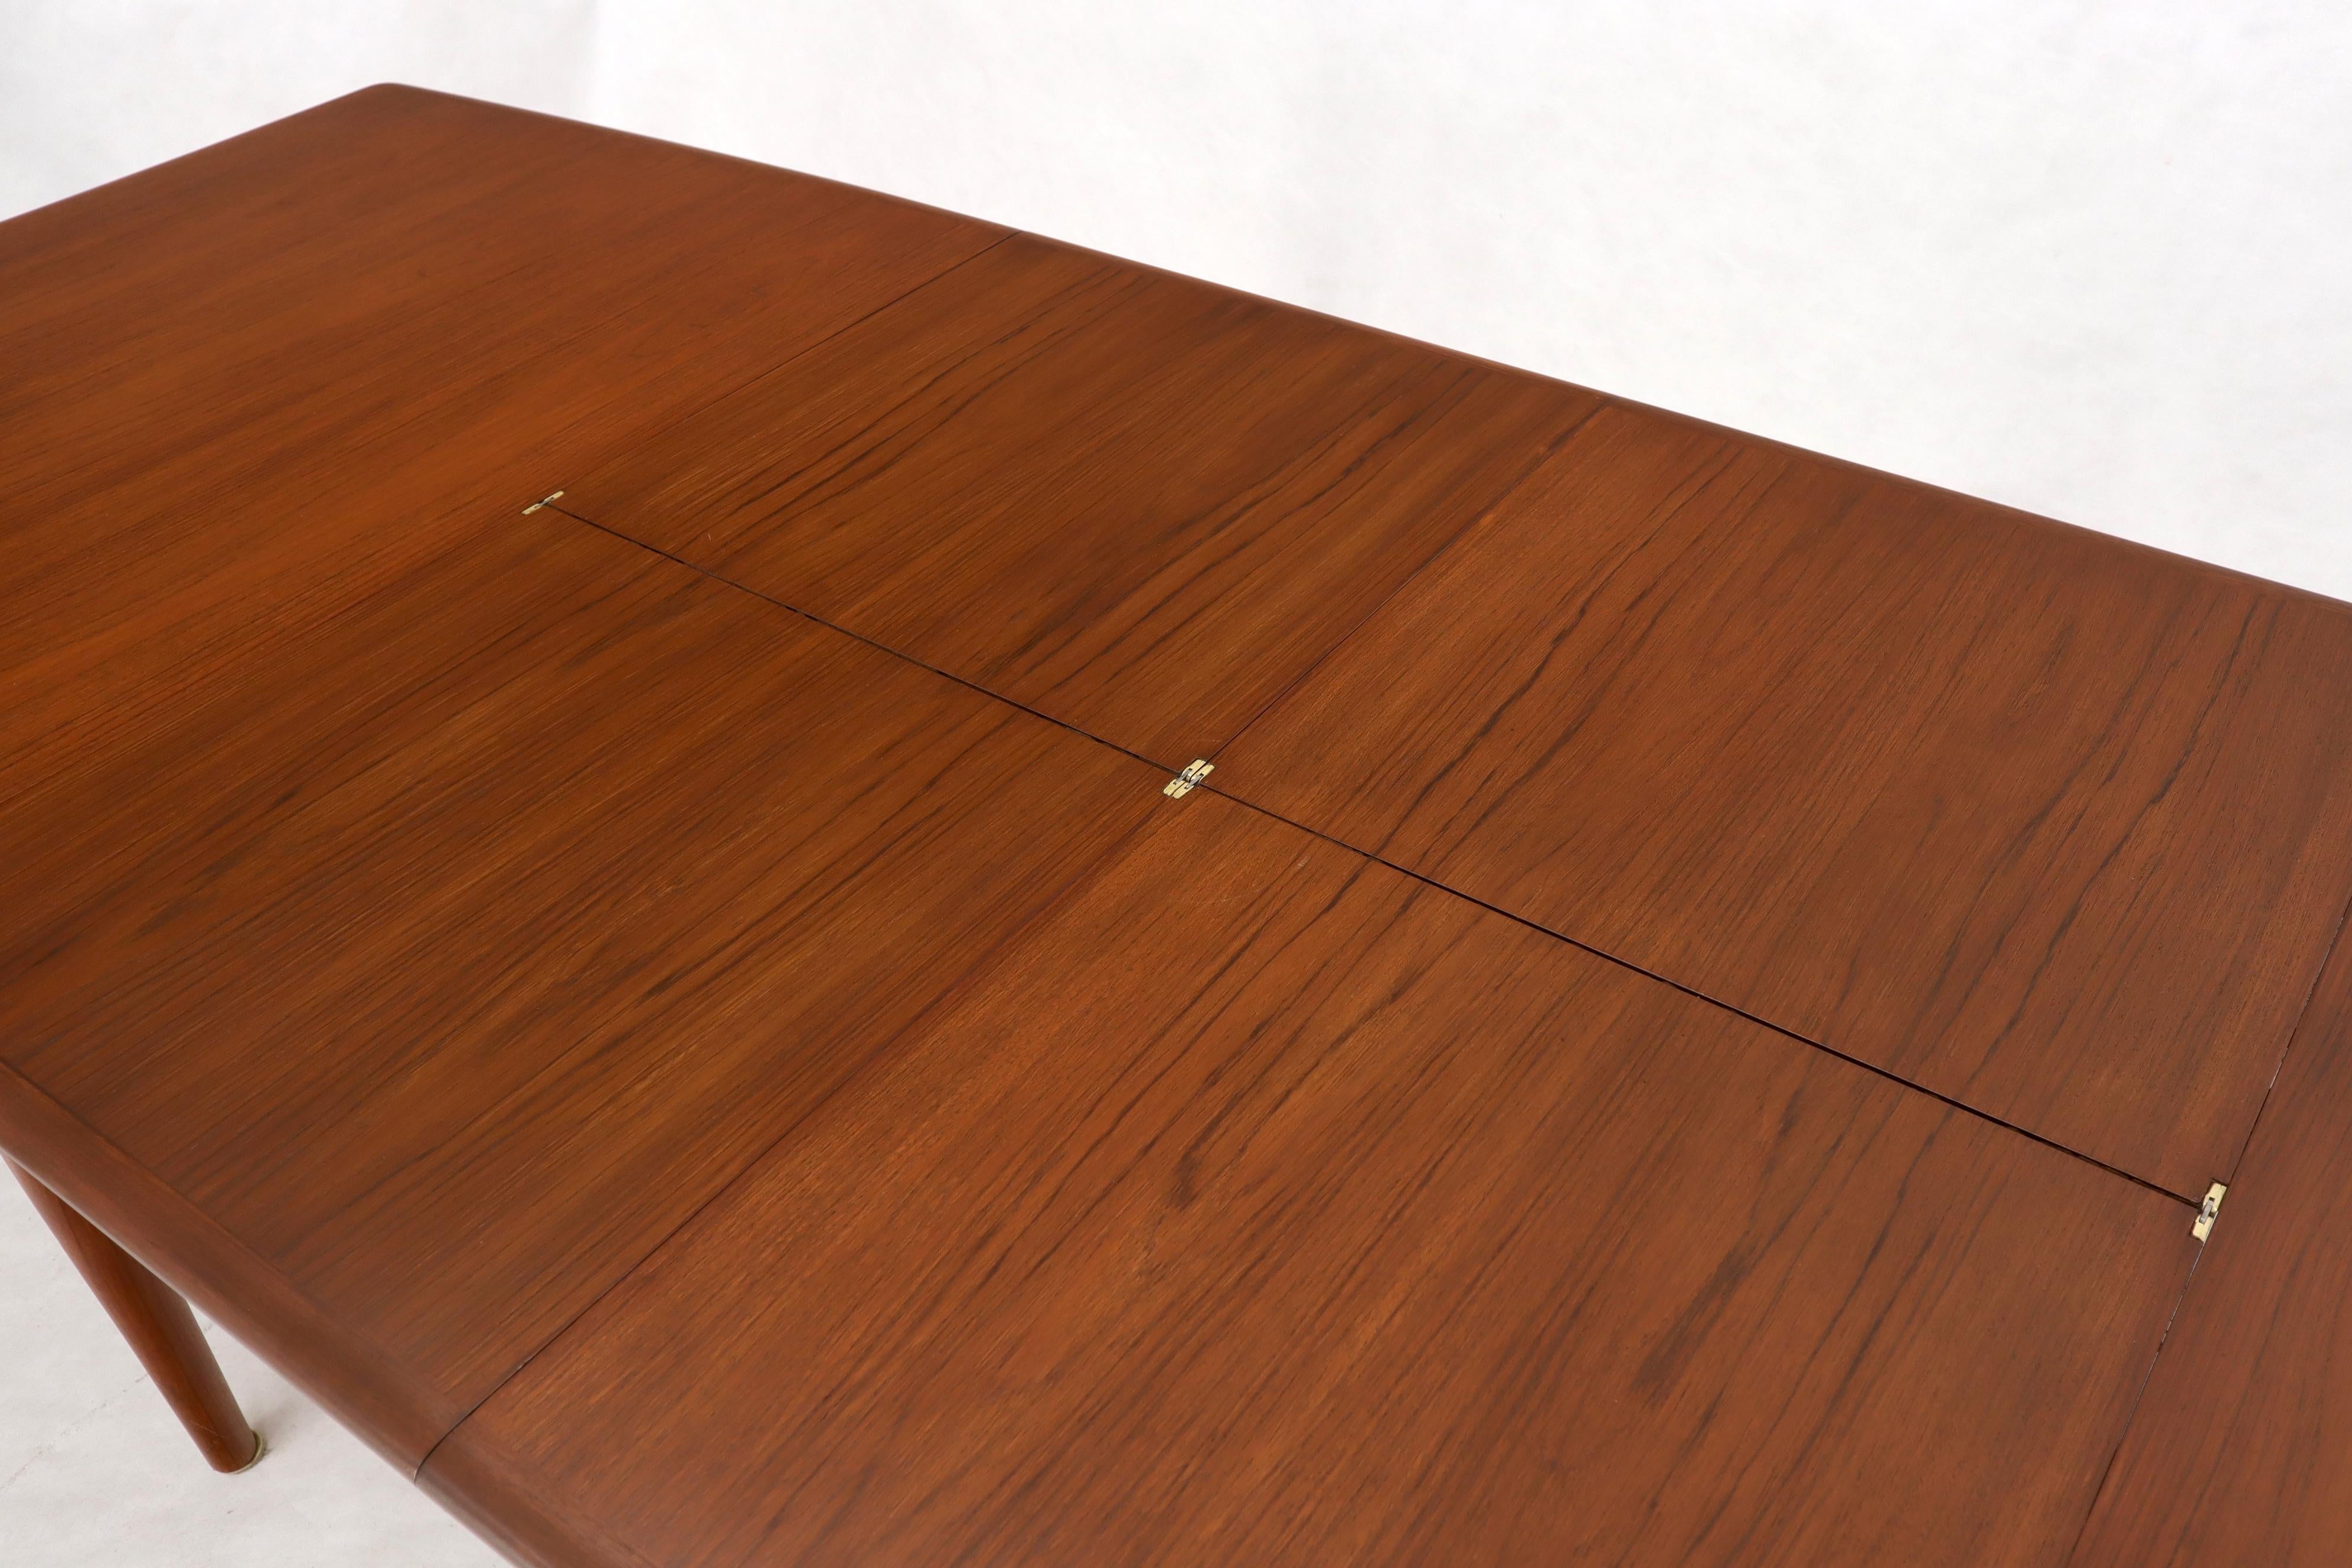 Danish Mid-Century Modern Teak Dining Table with Two Pop Up Self Storing Leaves In Excellent Condition For Sale In Rockaway, NJ